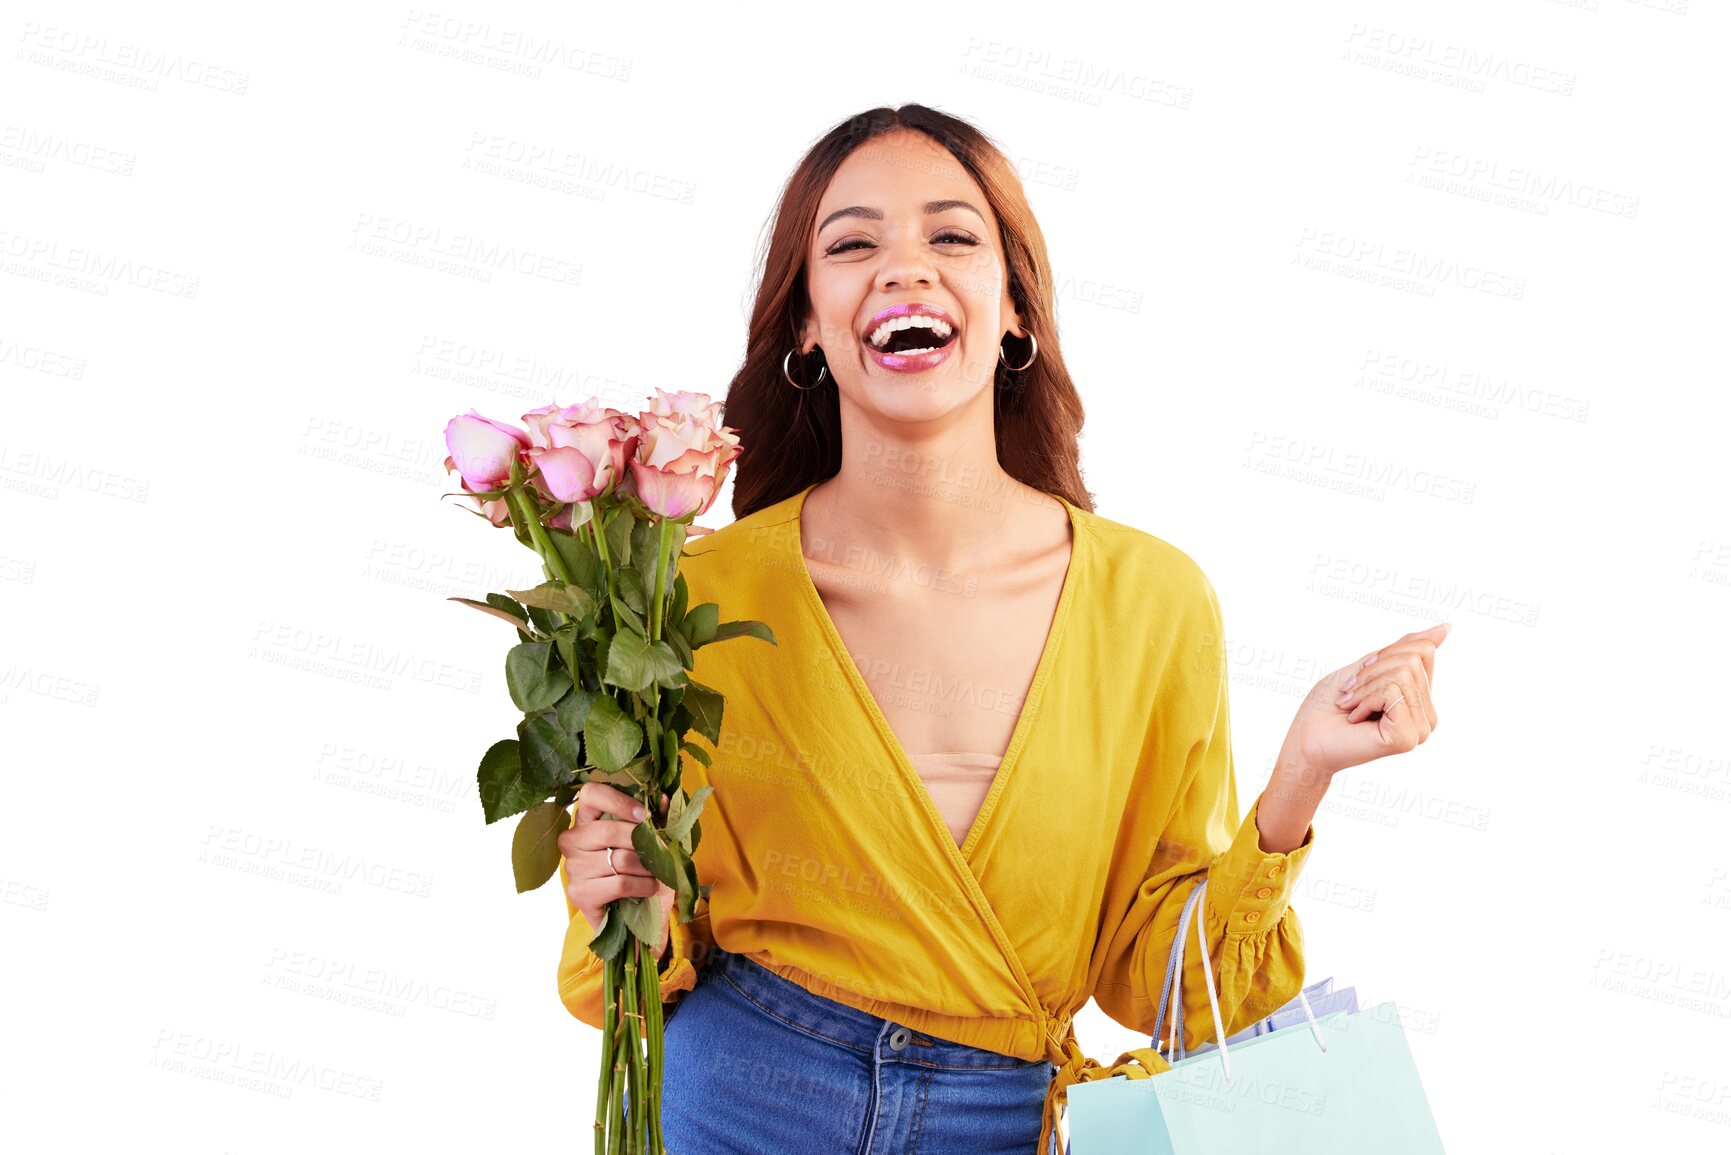 Buy stock photo Portrait, shopping bag or happy woman with bouquet of flowers for valentines day, gift or anniversary. Smile, sale or excited customer with roses or pink plants isolated on transparent png background